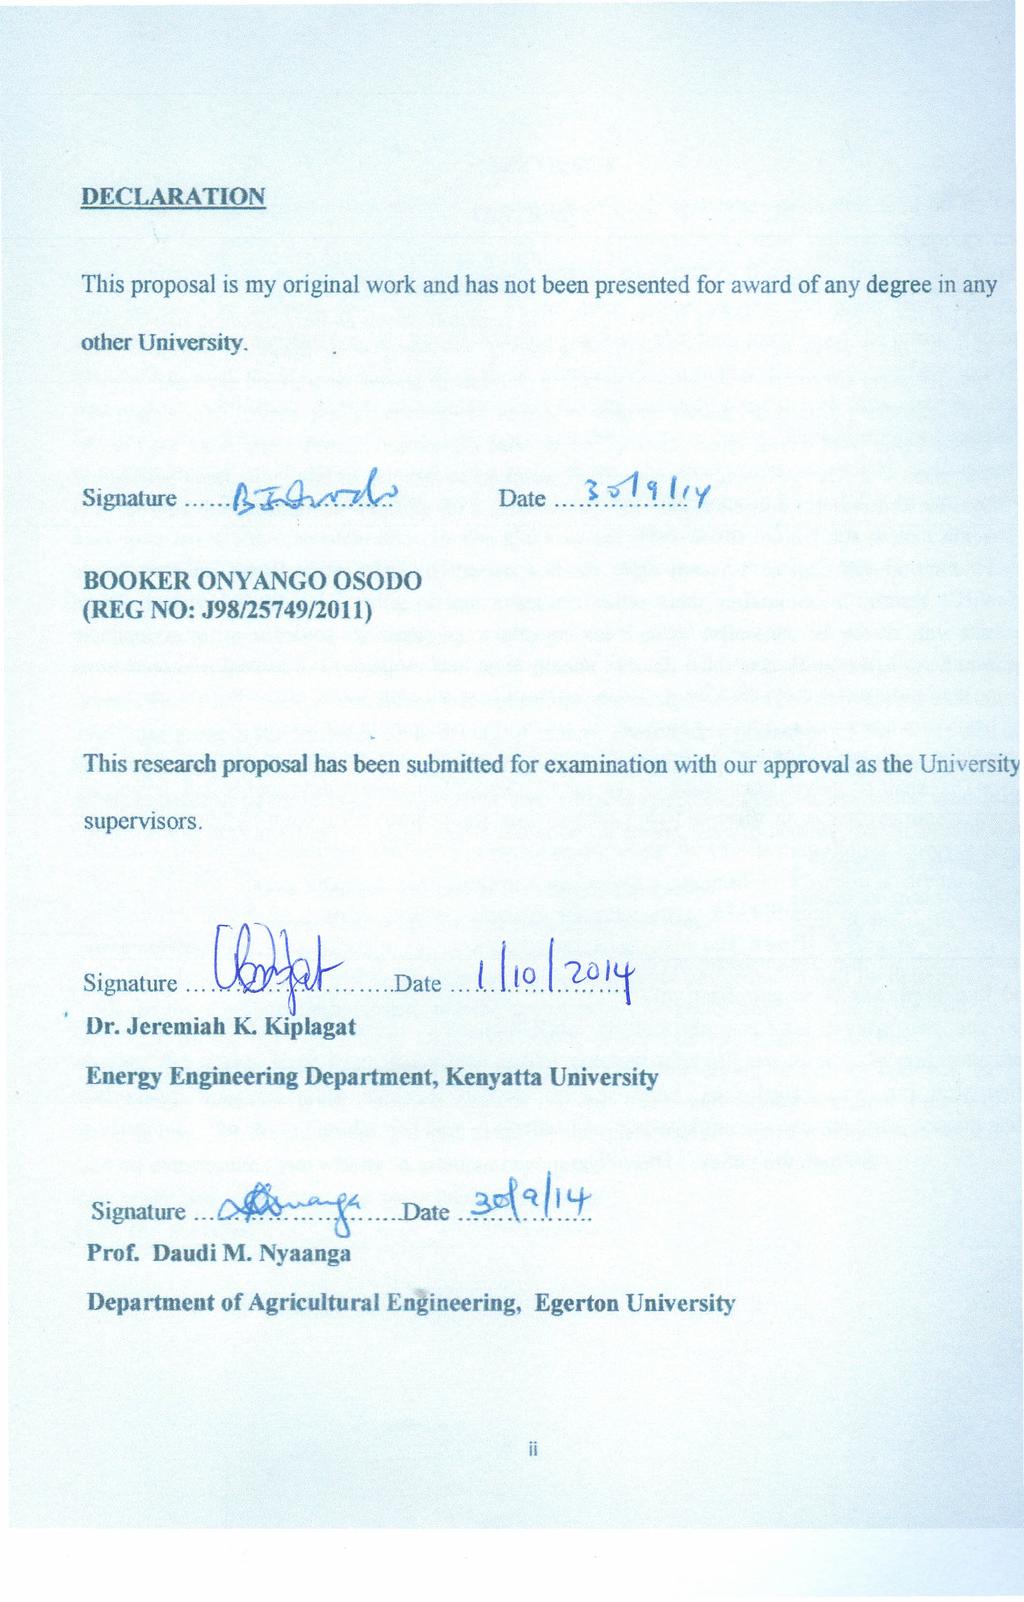 DECLARATION This proposal is my original work and has not been presented for award of any degree in any other University. Signature o,:-~ 